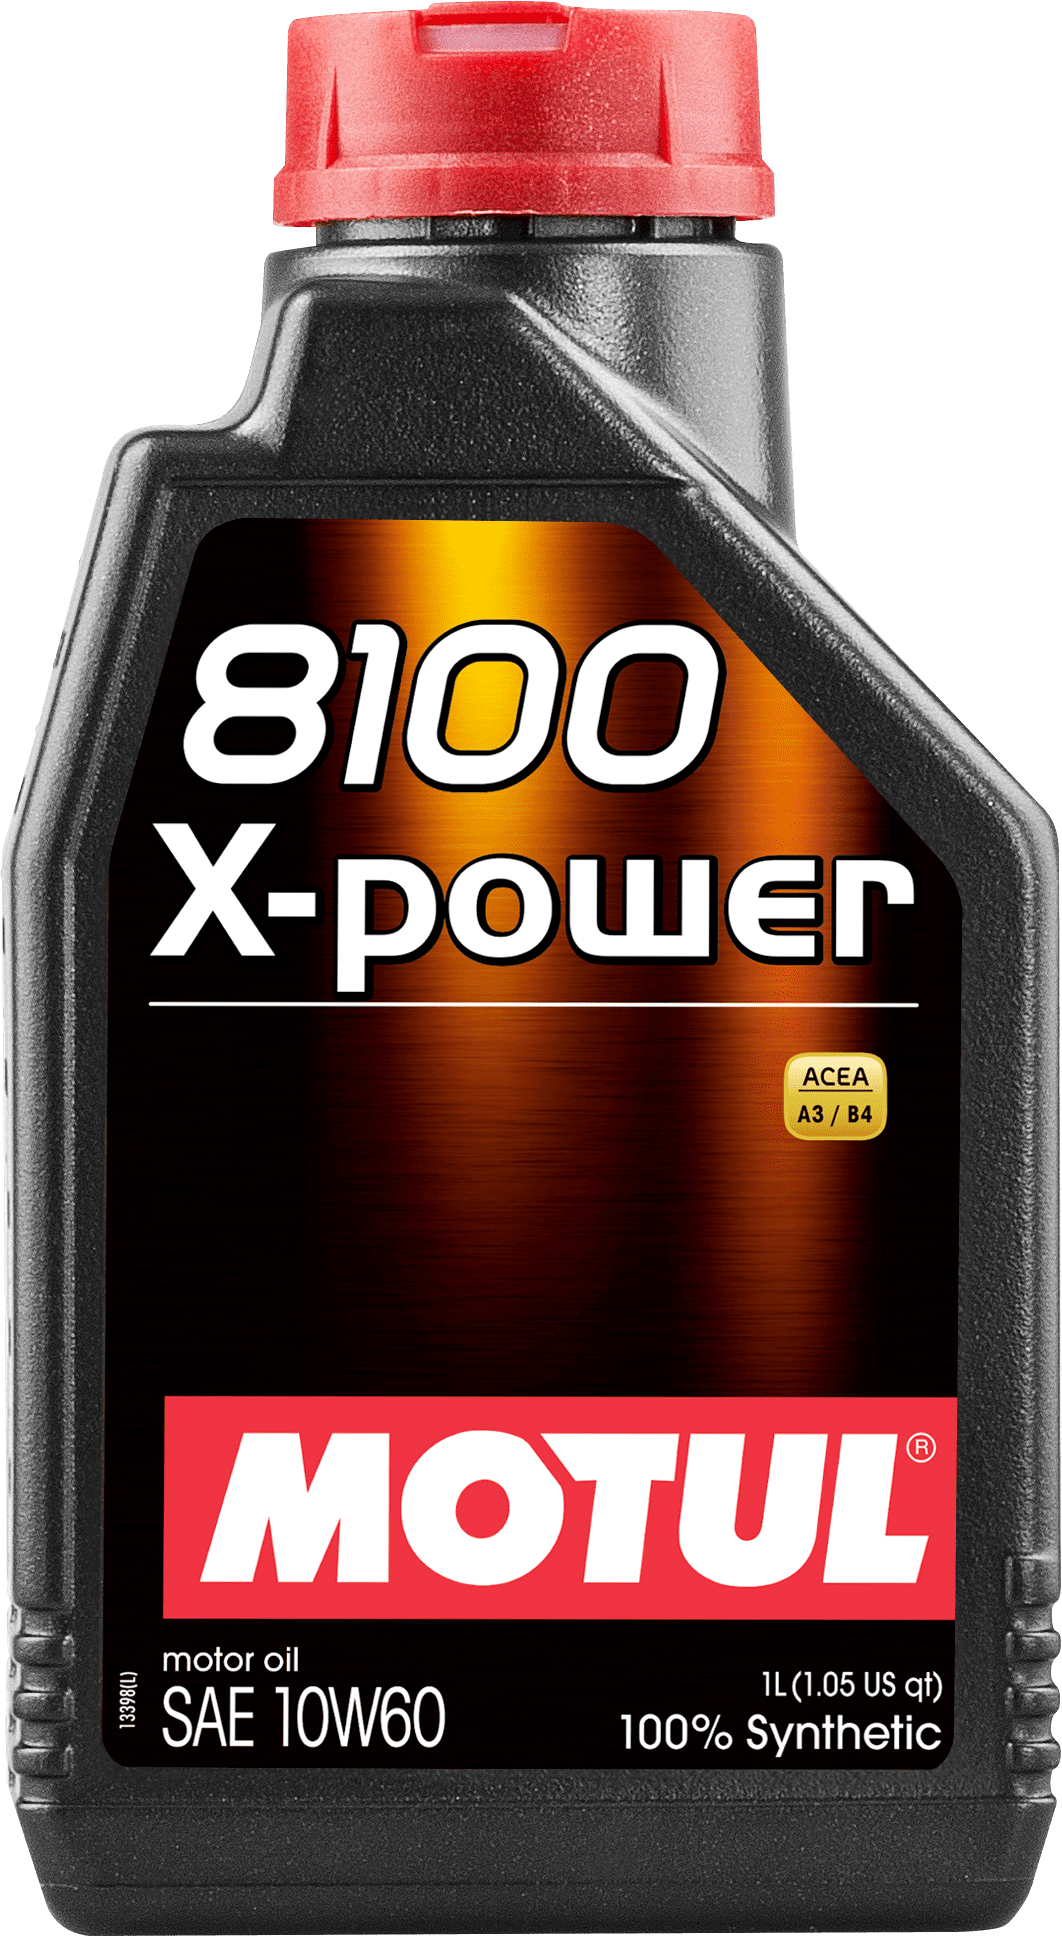 106142-1 100% Synthetic and high performance Engine lubricant.